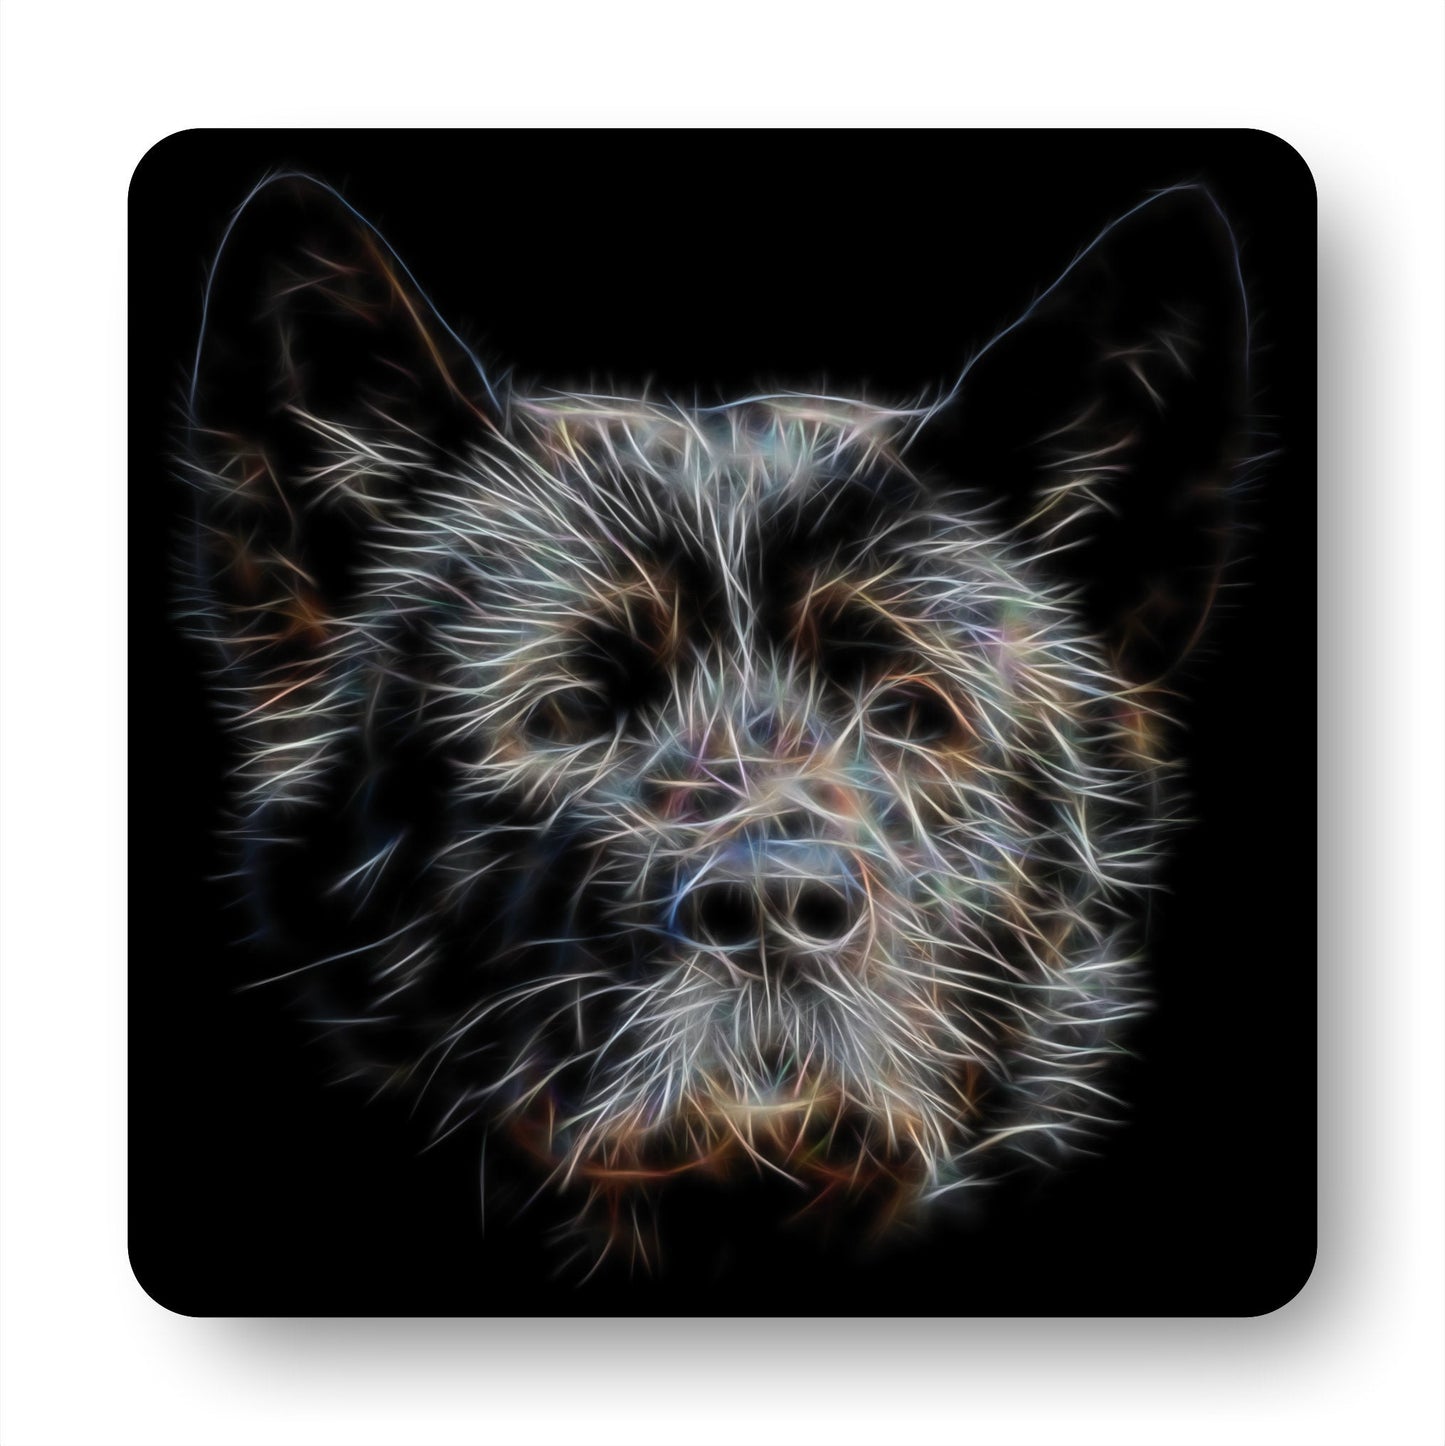 Black American Akita Fractal Art Metal Wall Plaque. Also available as Mouse Pad, Keychain or Coaster.